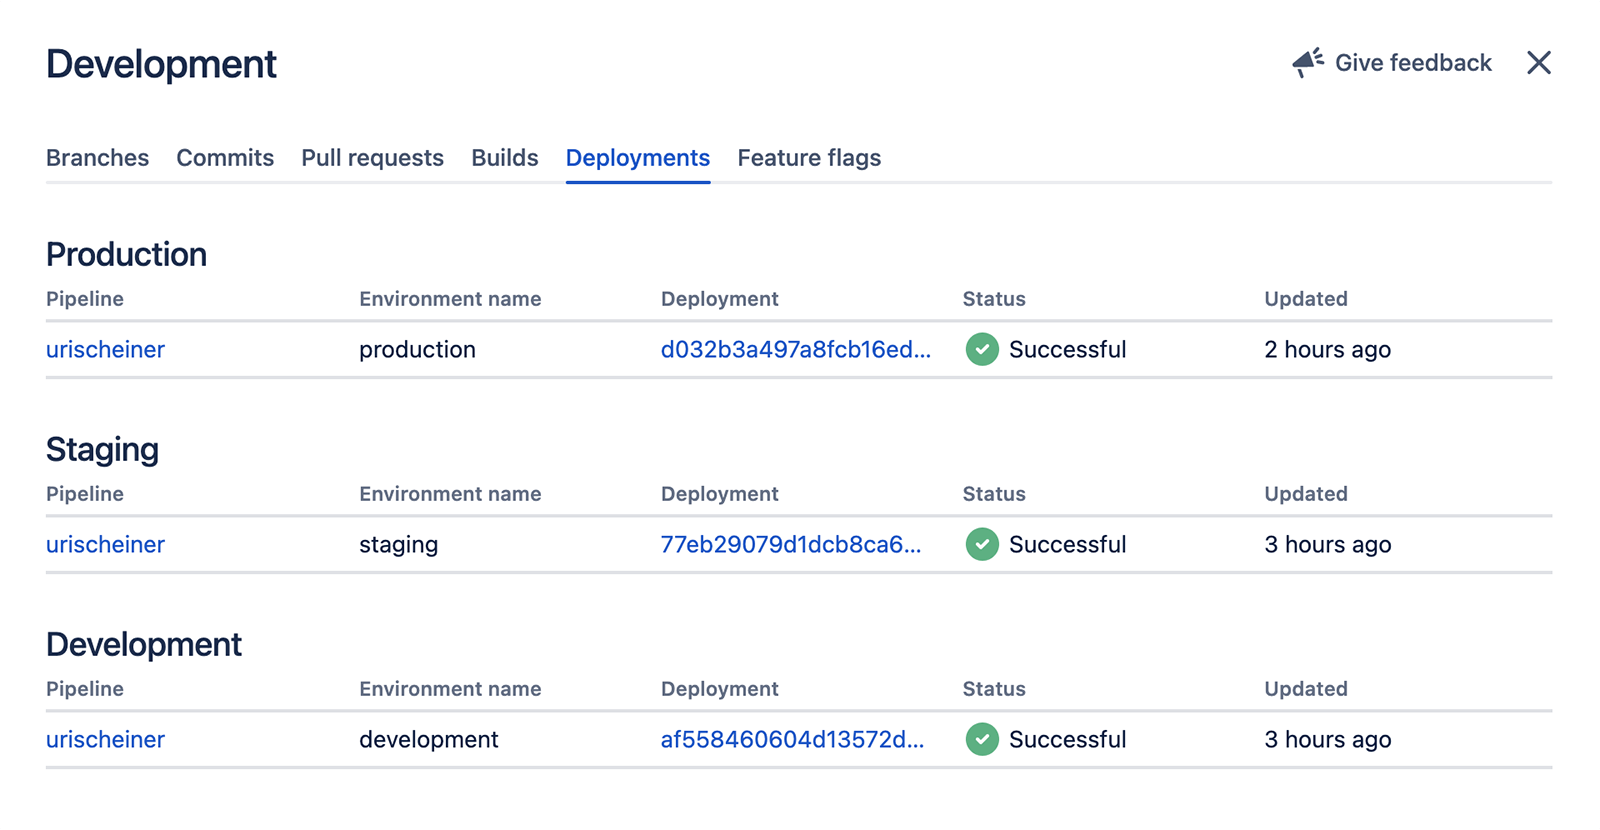 History and status of ticket deployment